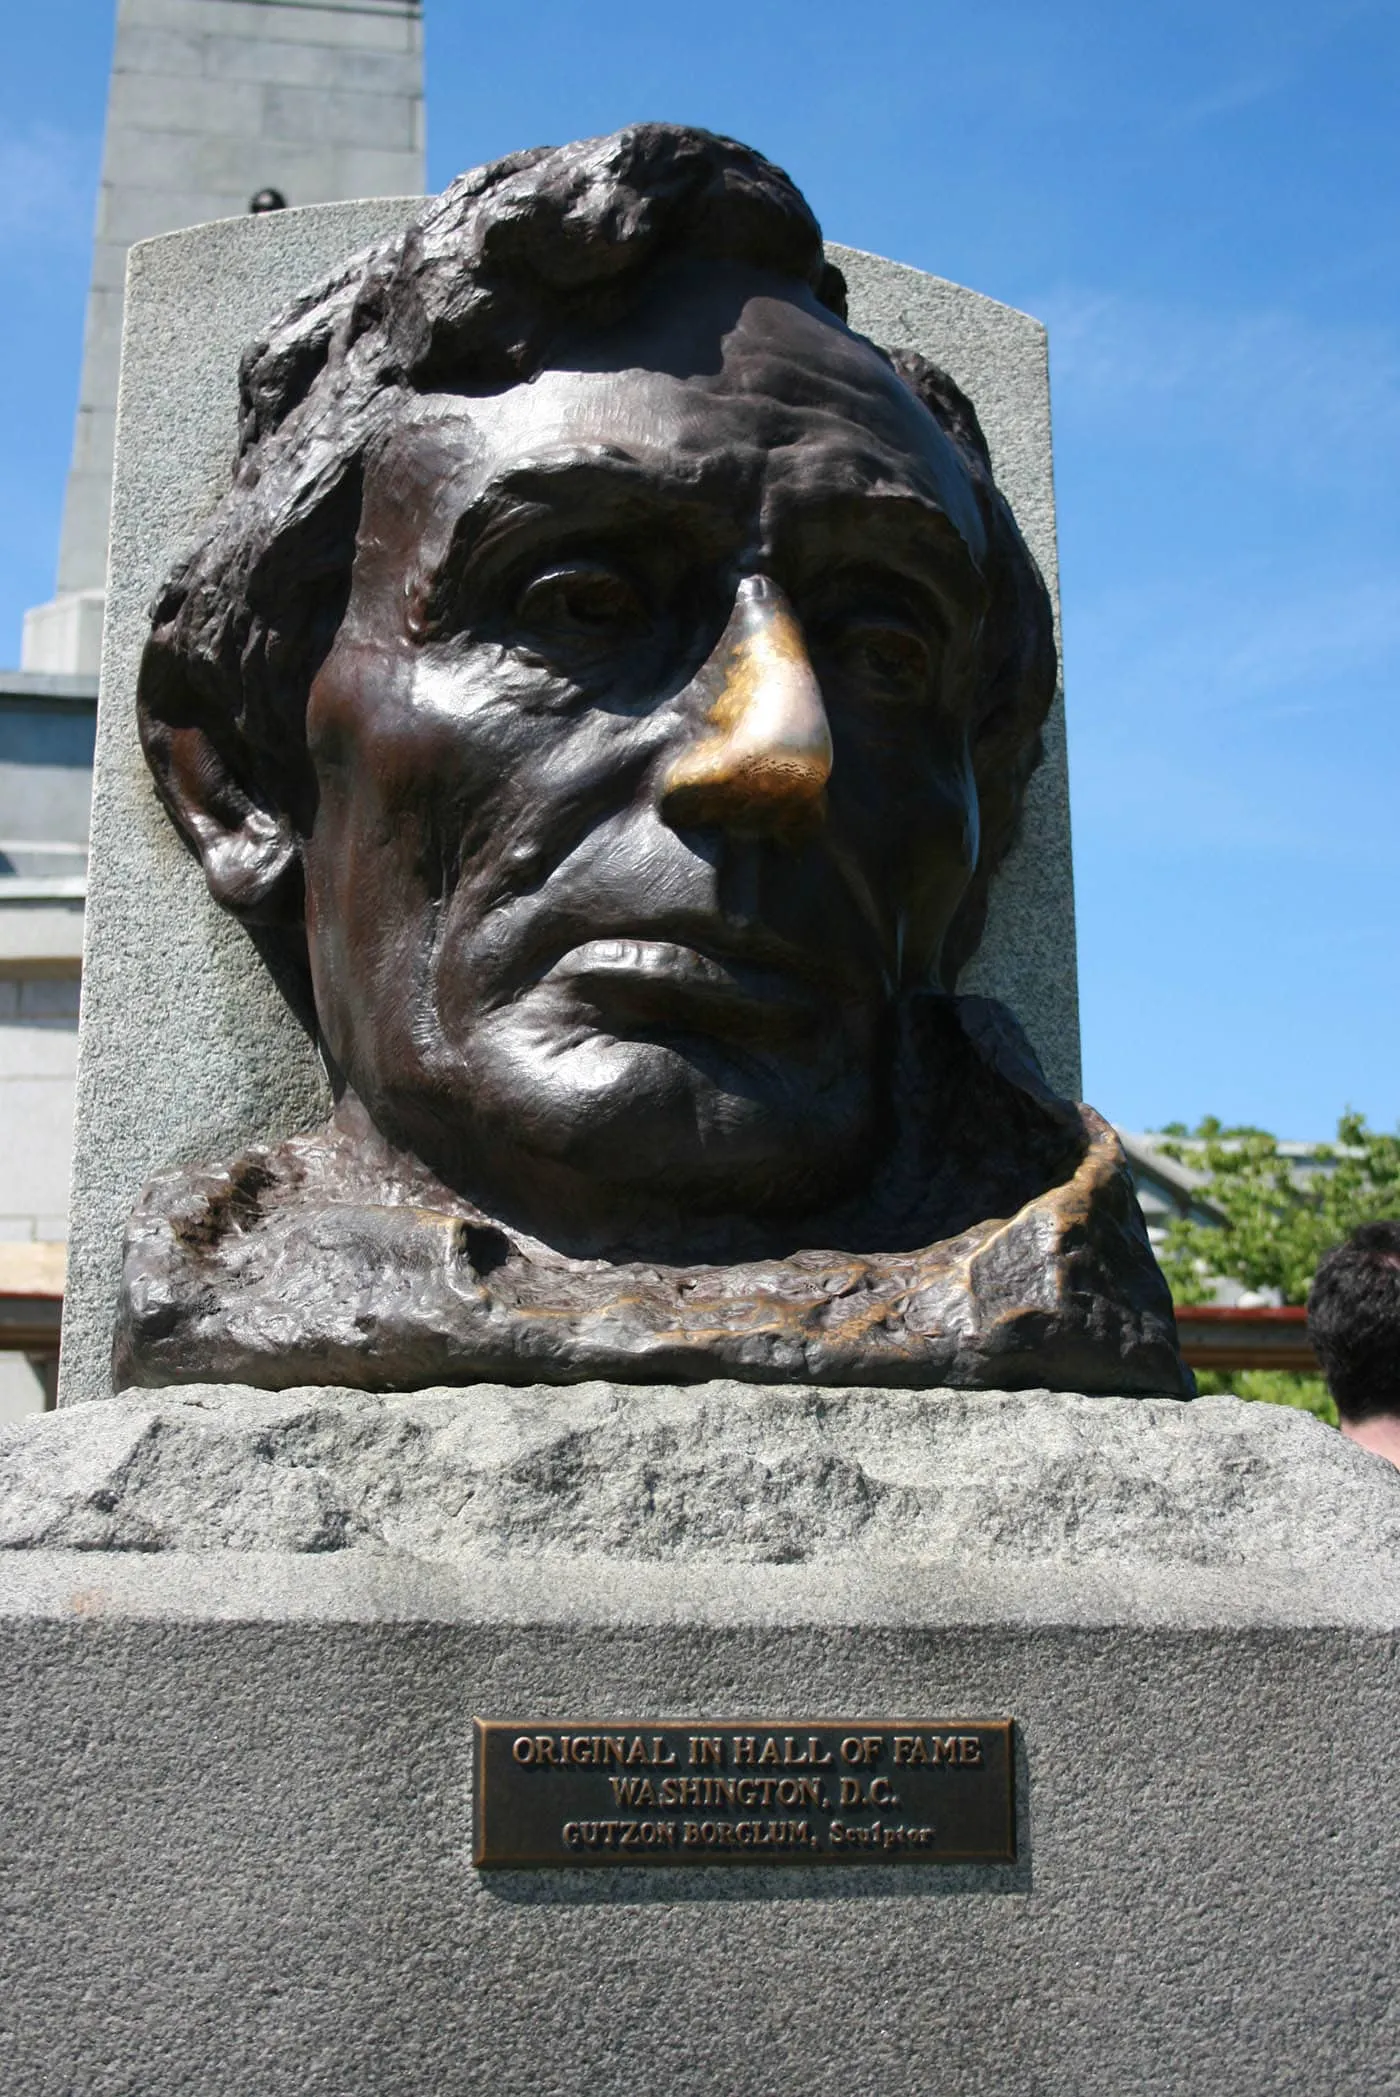 Abraham Lincoln's Lucky Nose in Springfield, Illinois - rub Lincoln's nose for good luck at Oak Ridge Cemetery in Springfield, Illinois